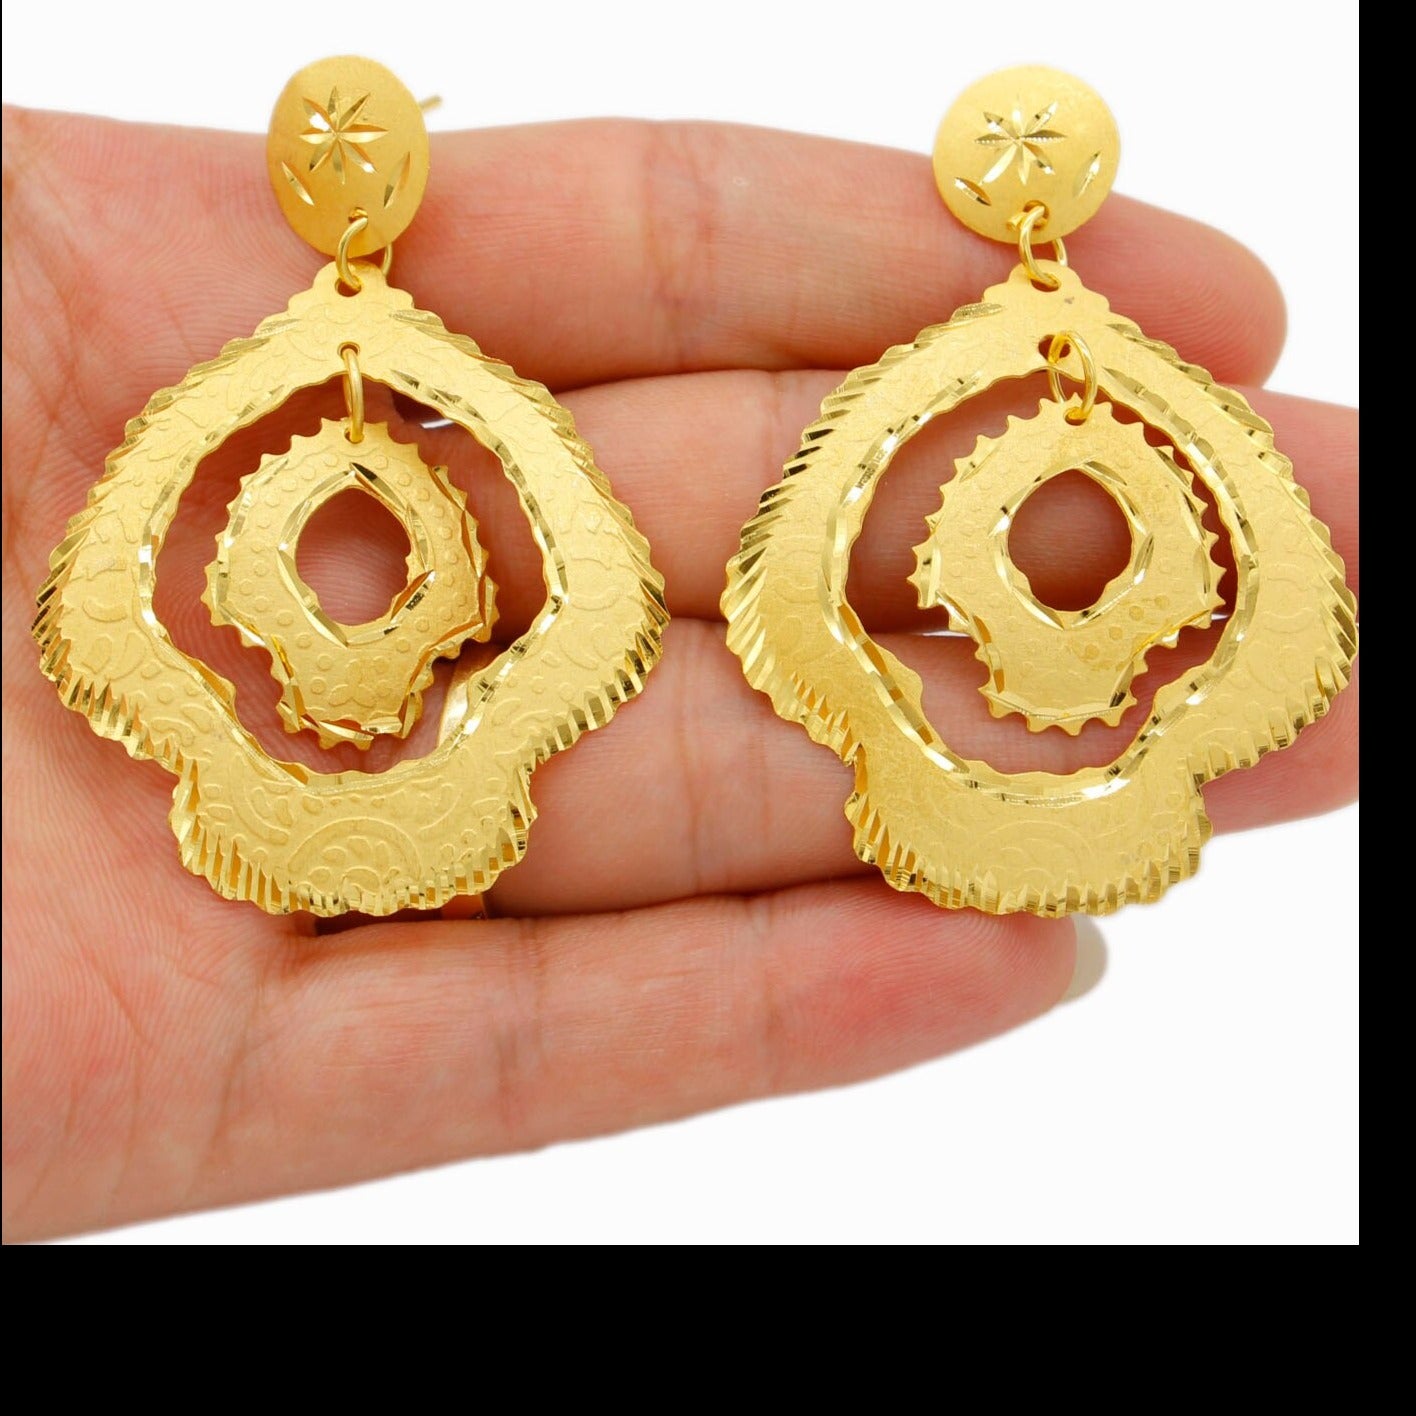 Latest Gold Tops Earrings Designs With Weight And Price || Shridhi Vlog |  Small earrings gold, Gold earrings with price, Man gold bracelet design